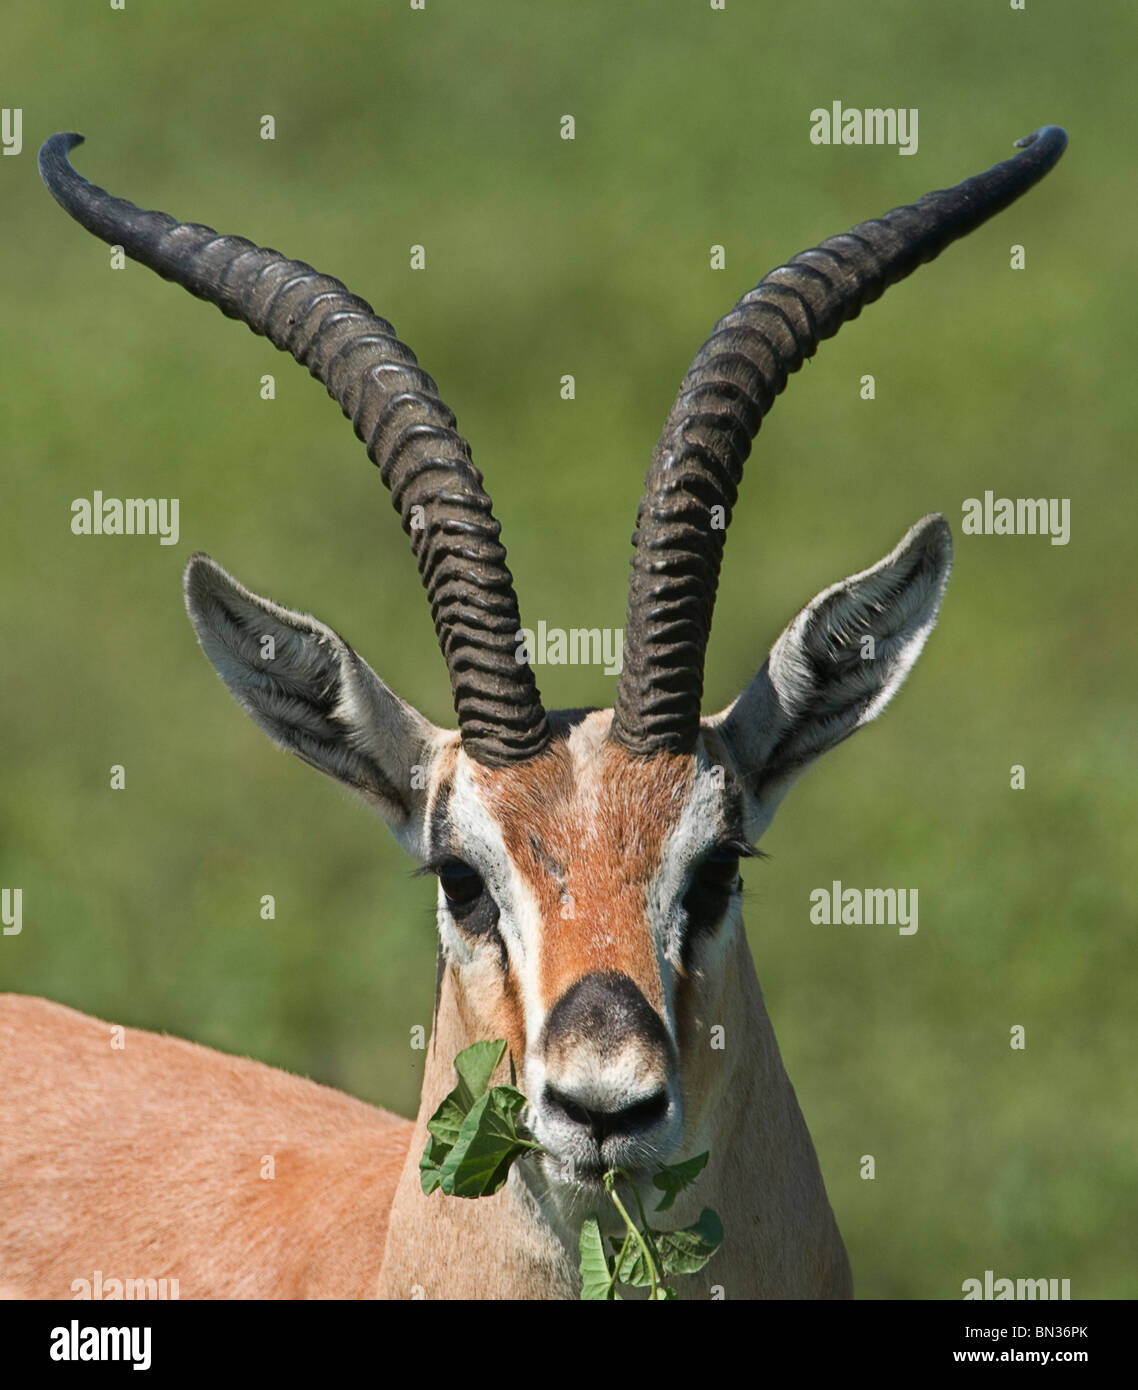 Grant's gazelle, photographed in Serengeti National Park, Tanzania, Africa Stock Photo